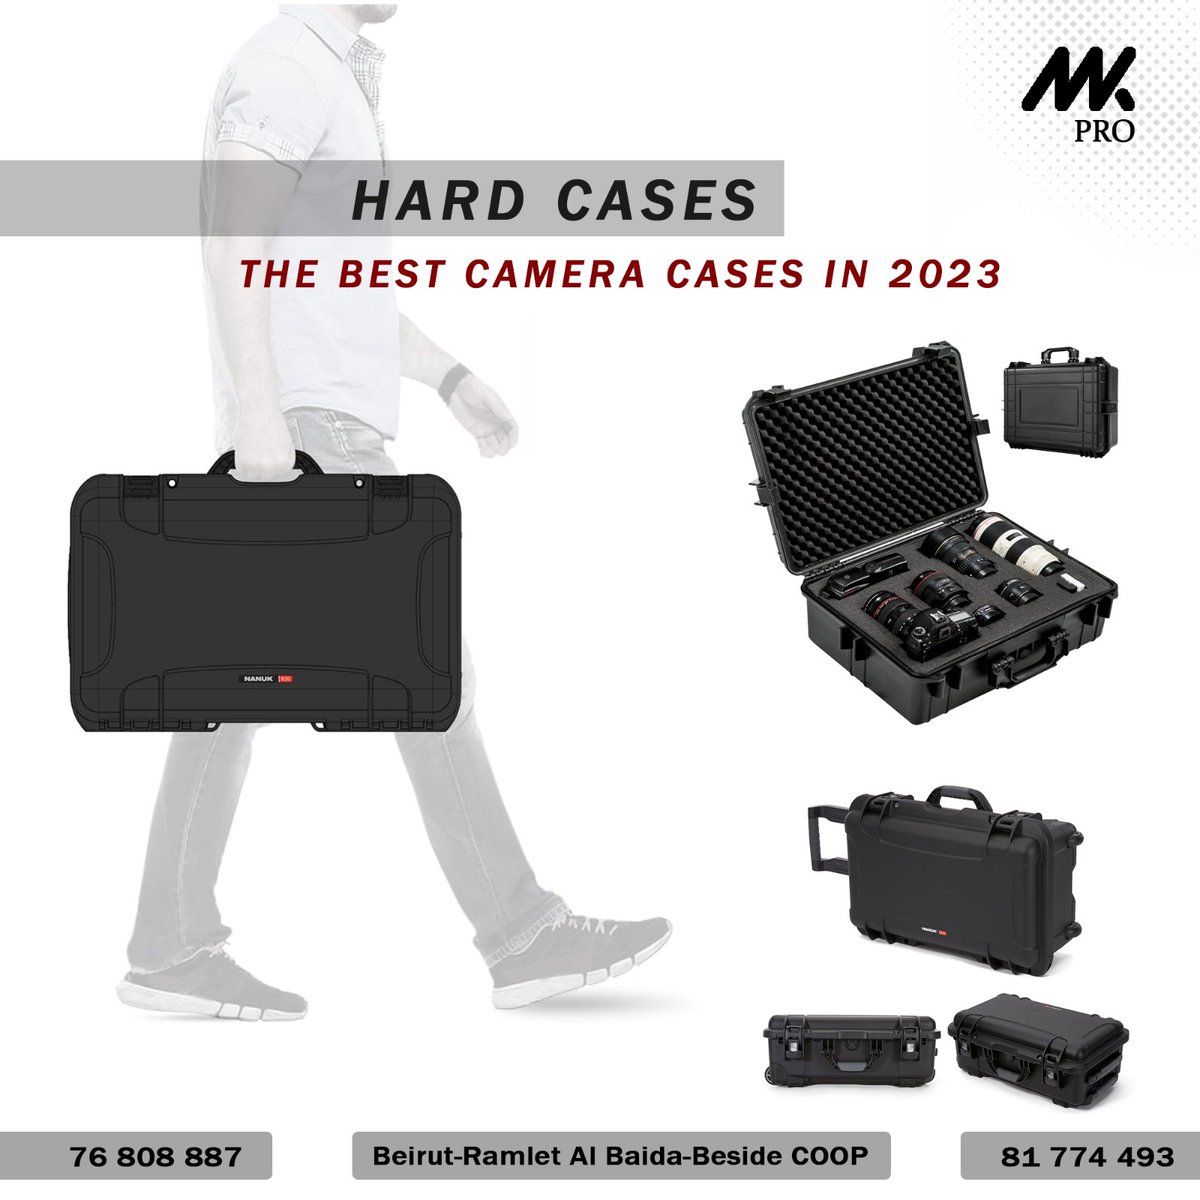 📸🔍 Searching for the best camera cases in 2023? 

Let's connect and share our passion together!
📞 81774493 / 76808887
📍Ramlet Al Bayda - Thomas Edison - Beside Coop

#hardcases #cameraprotection #topquality #photographyessentials #2023gear